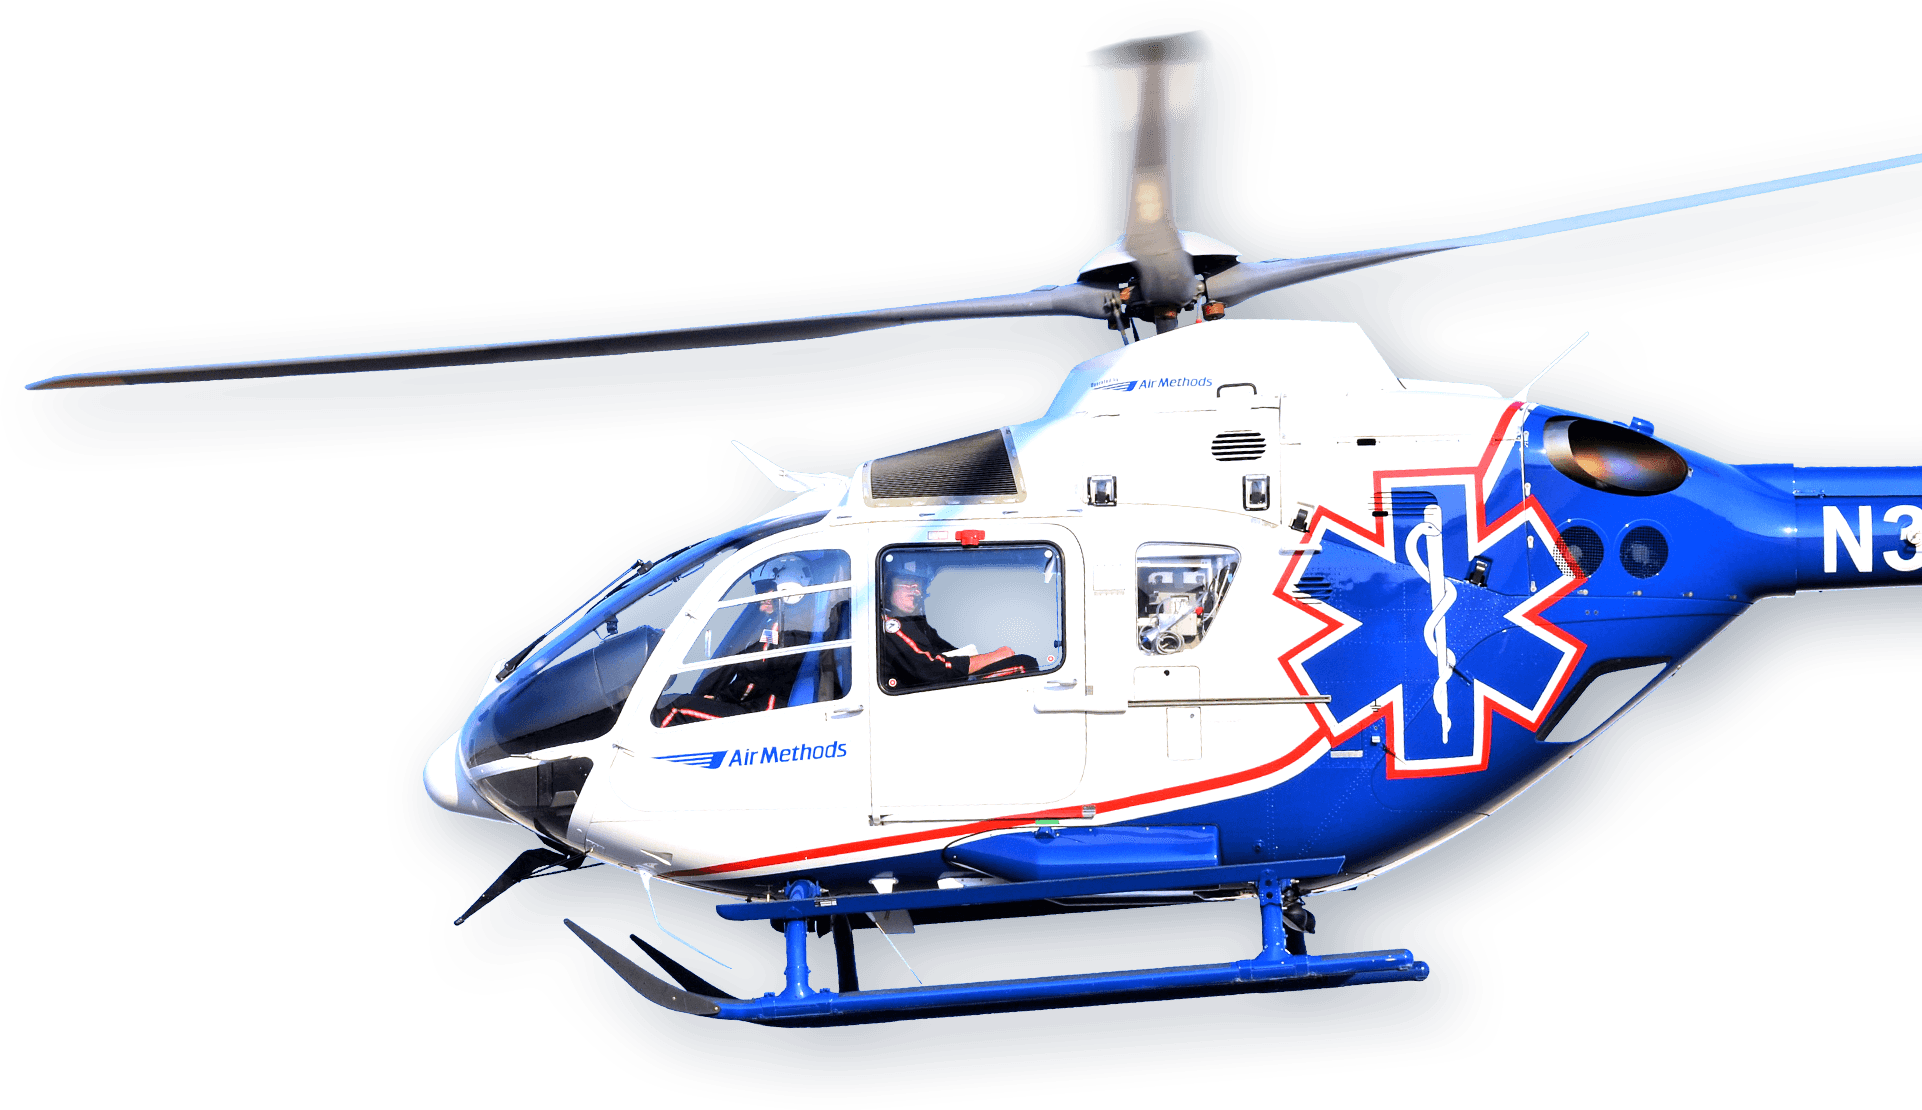 Air Methods helicopter. 